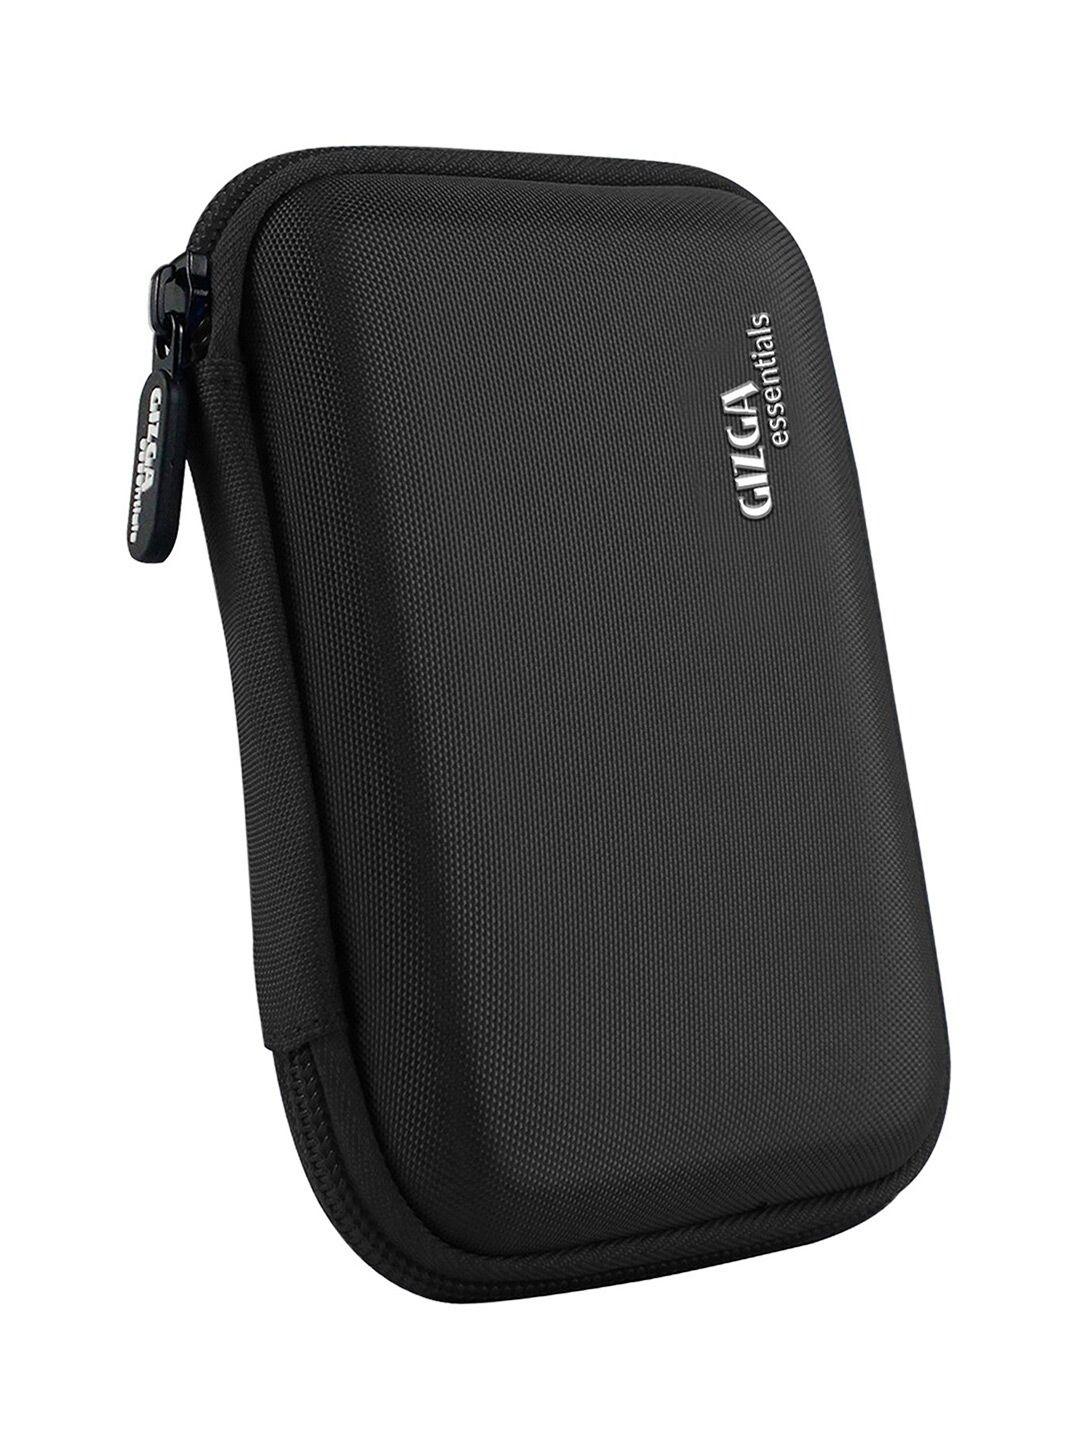 gizga essentials hard disk drive case double padded laptop bag